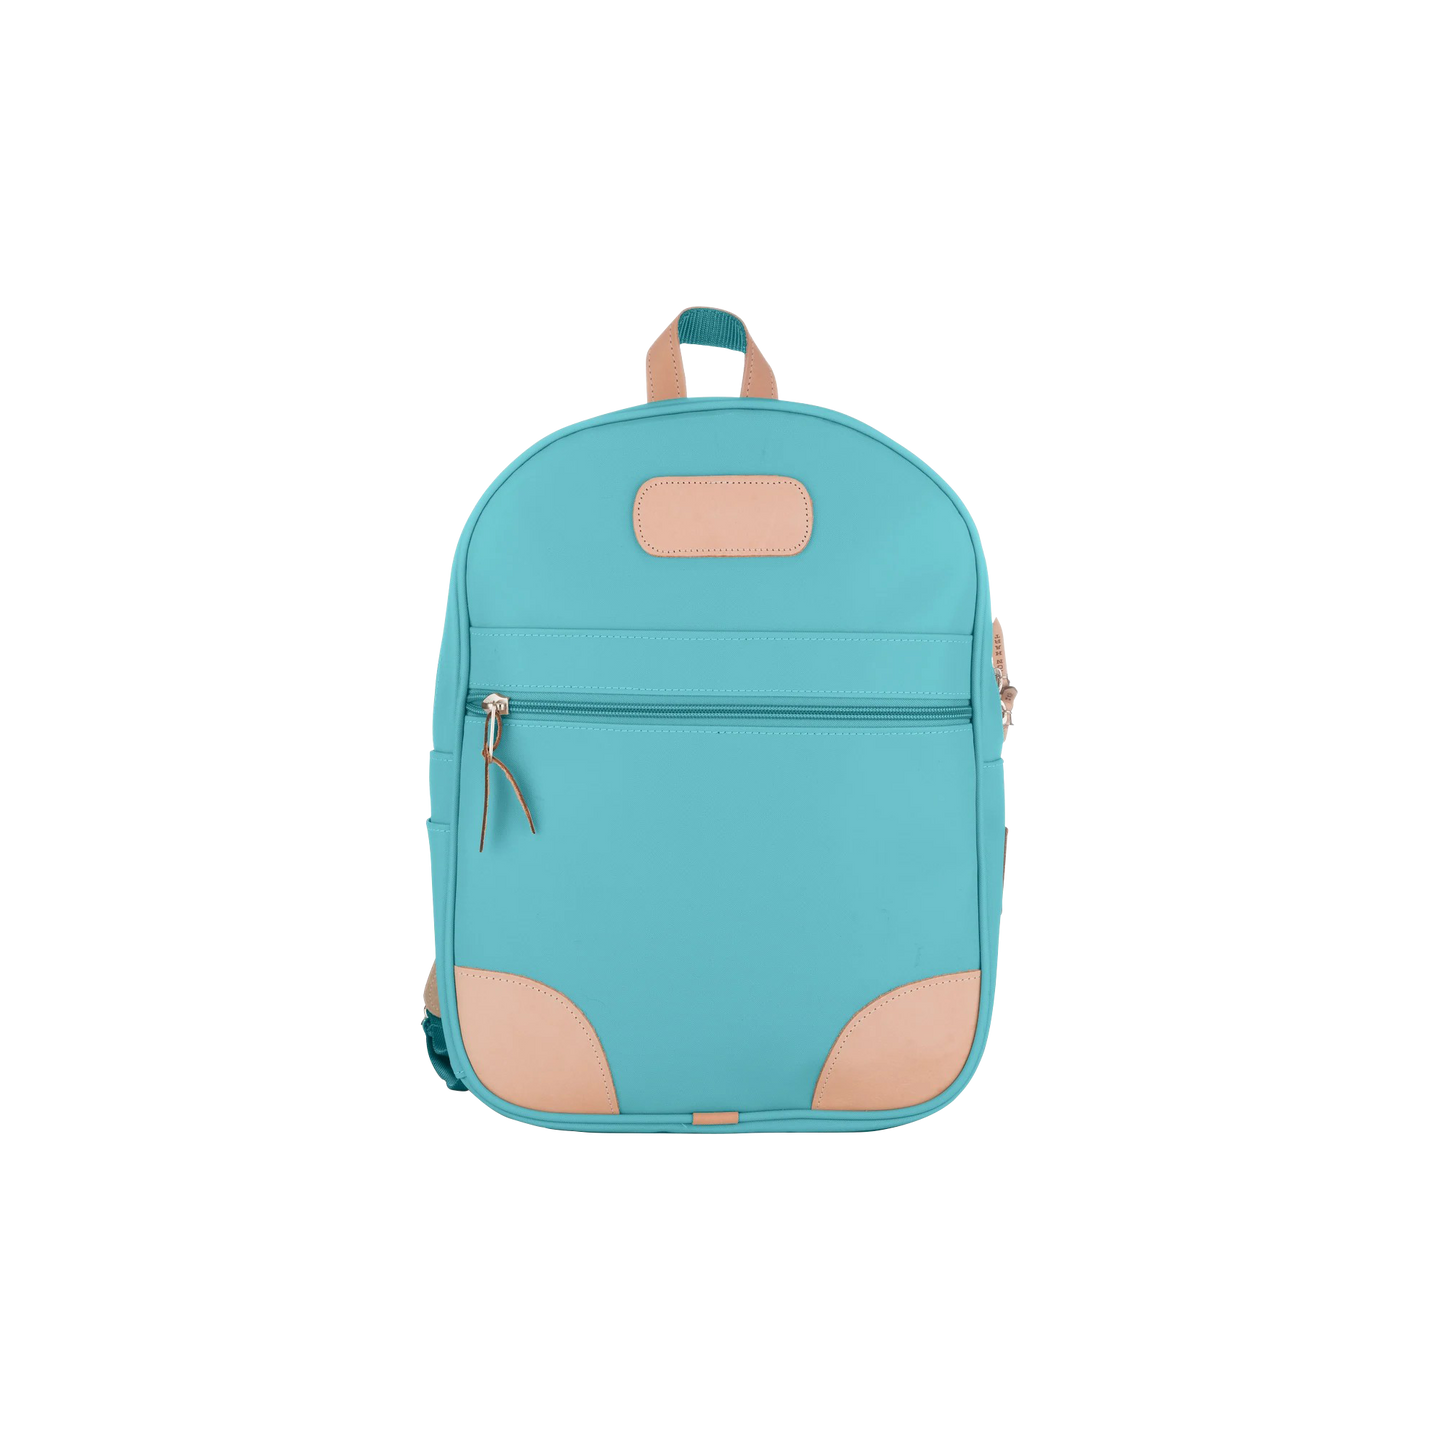 Backpack - Ocean Blue Coated Canvas Front Angle in Color 'Ocean Blue Coated Canvas'